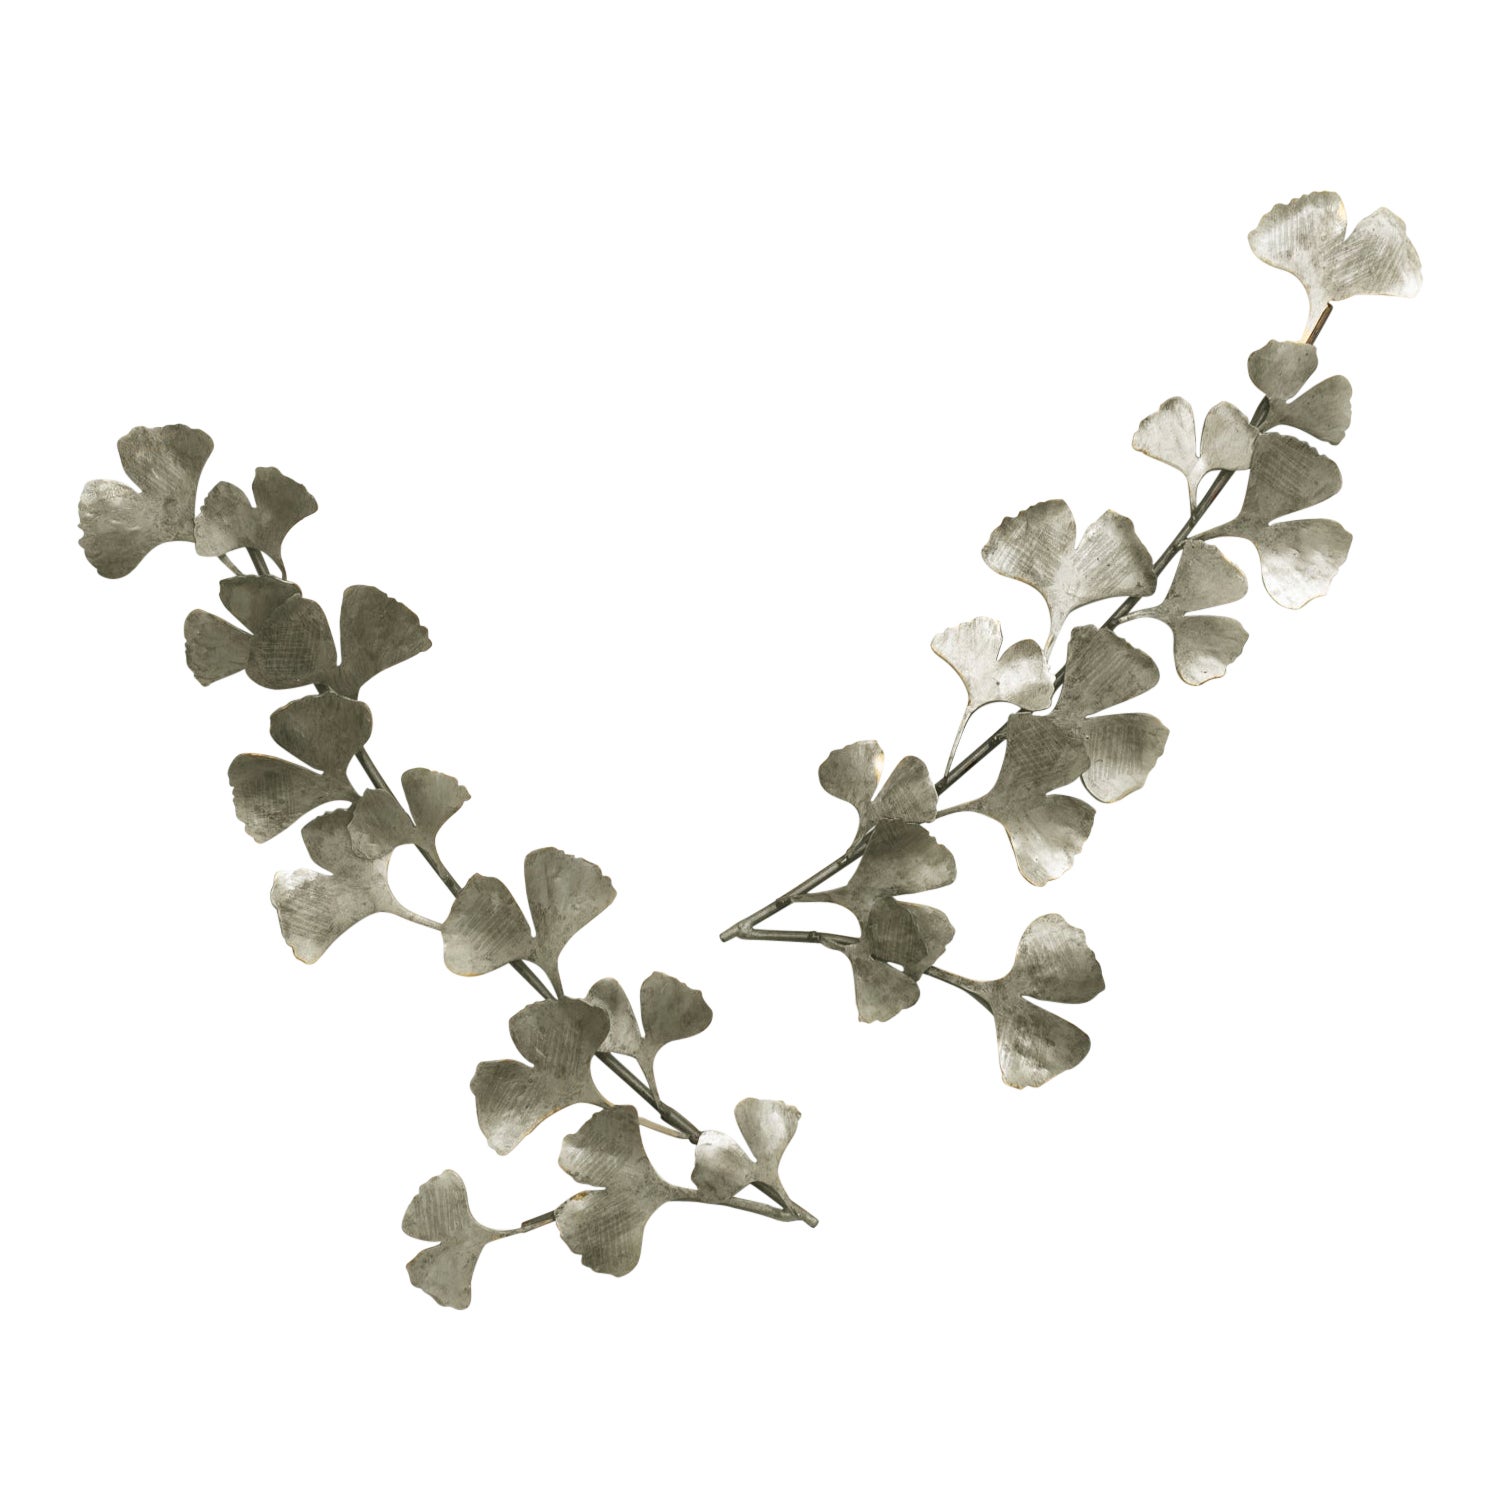 Ginkgo Double Branches in Aged Silver Finish